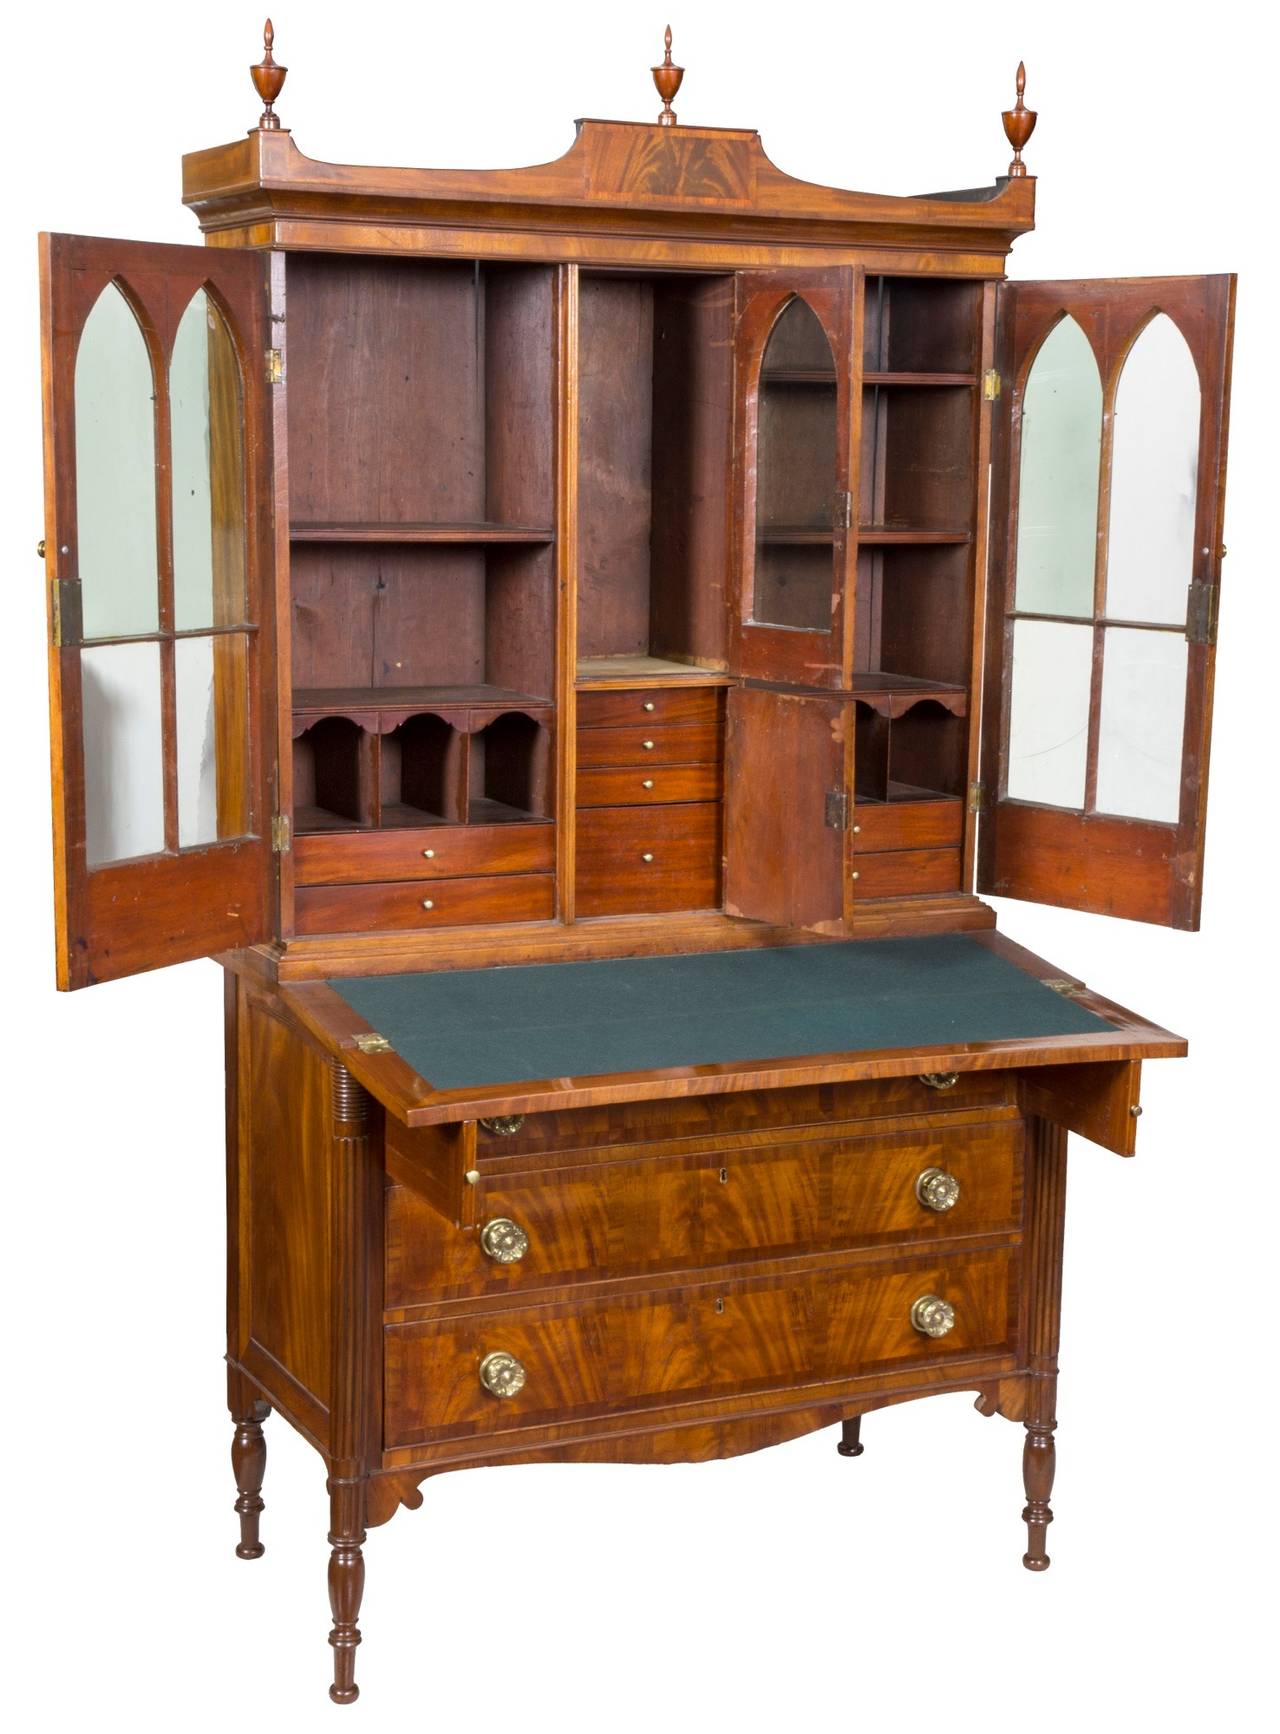 This secretaire has Gothic arch doors with an interesting central glass door above a prospect door opening to four drawers. This is quite rare, and offers the benefit of the full interior often found in slant lids desks, plus a bookcase above, all